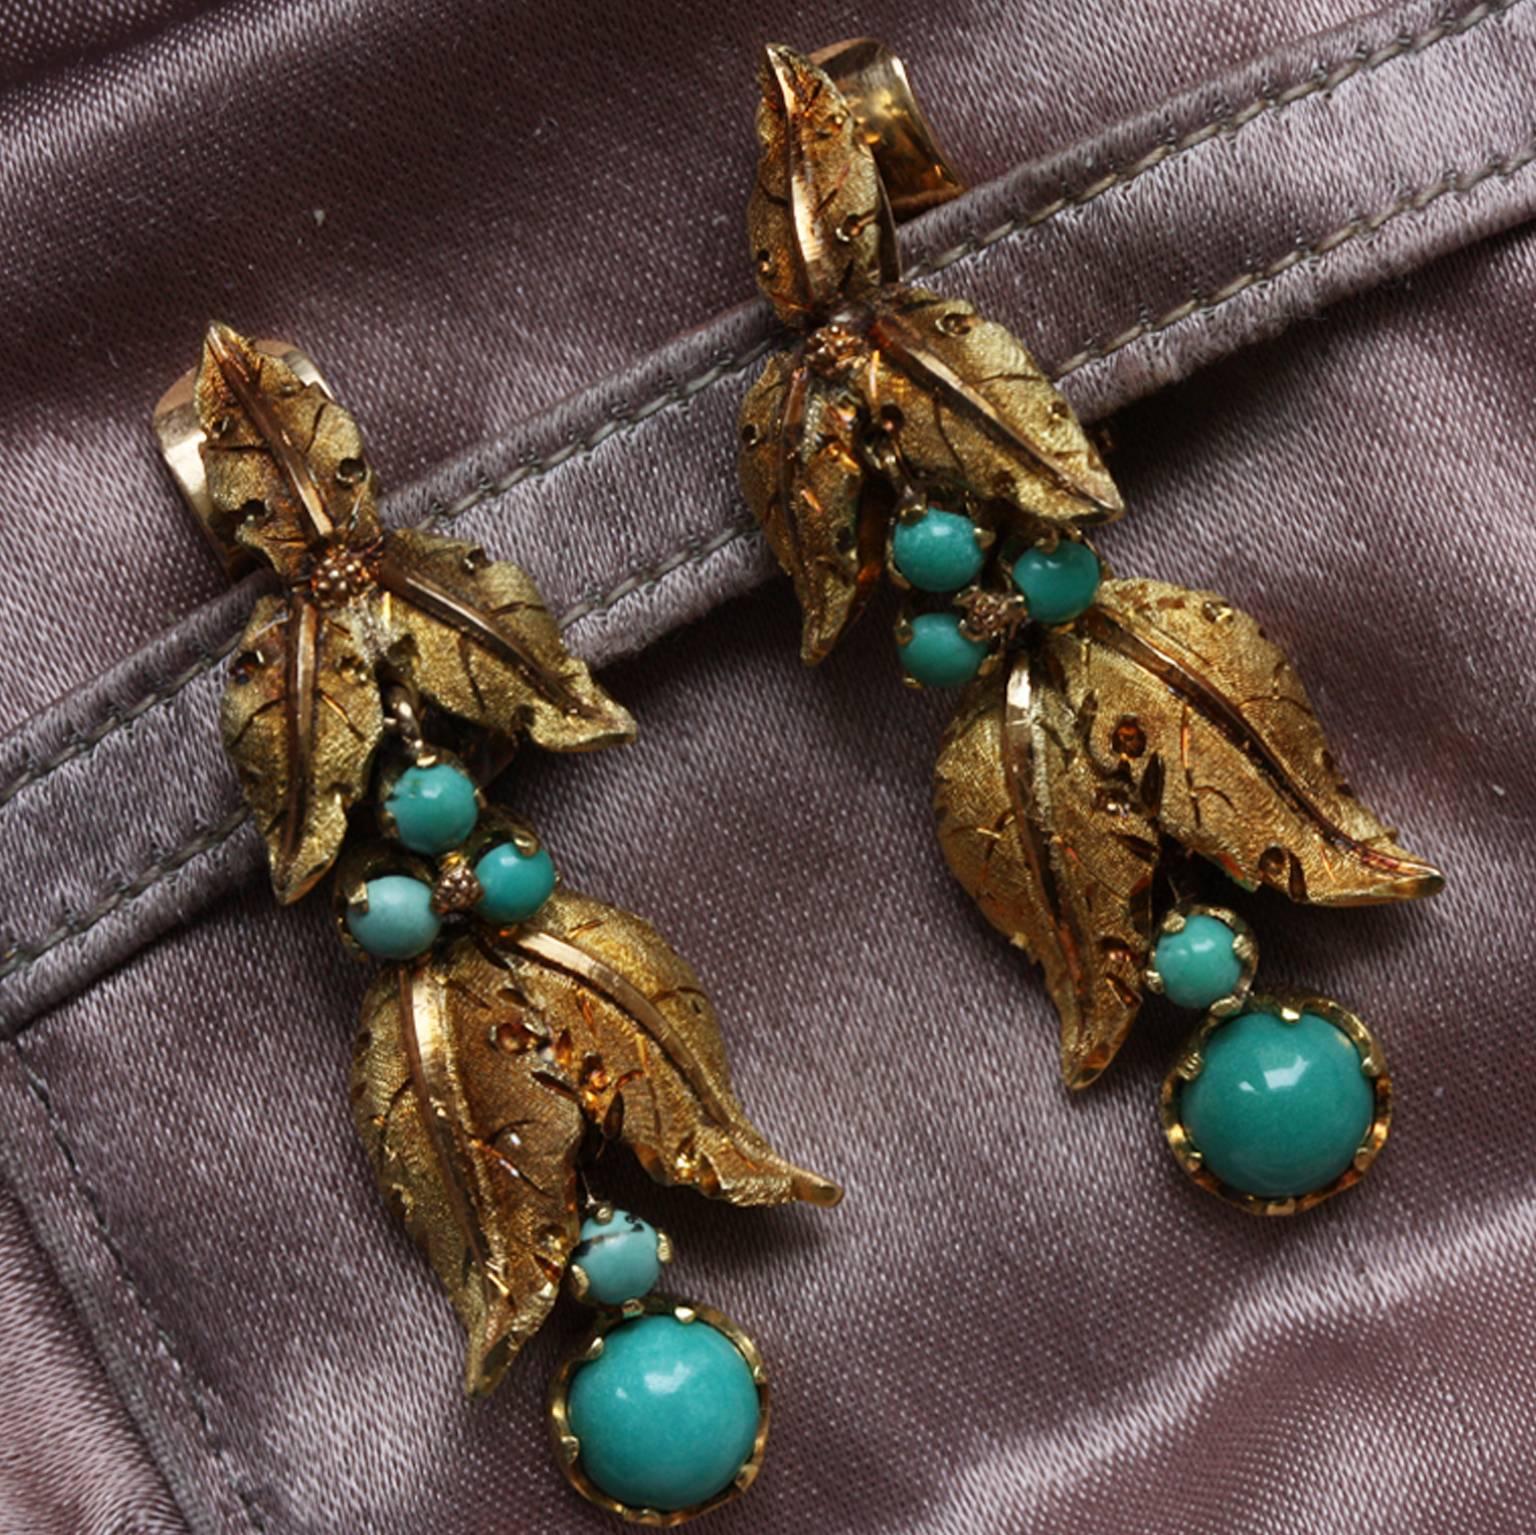 A pair of 18 carat gold and turquoise florally engraved earrings, signed: Mario Buccellati, in its original silk pouch, Italy, circa 1950.

weight: 14.93 grams
dimensions: 4.5 x 1.2 cm.